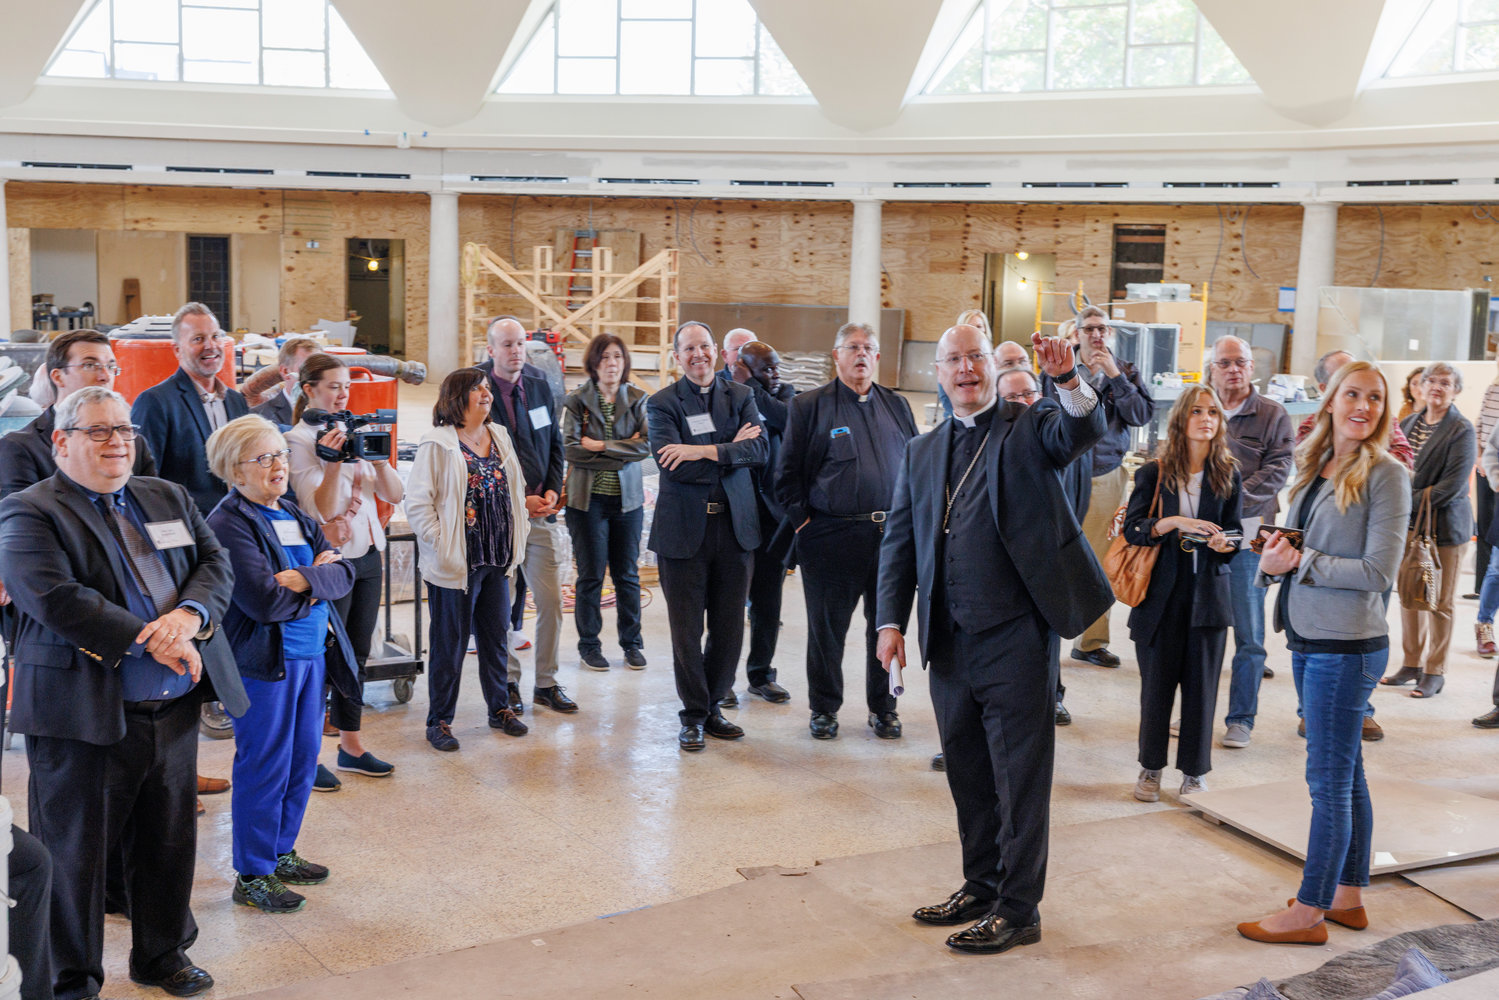 Bishop W. Shawn McKnight helps lead a handful of clergy, laypeople and media representatives on a tour of the Cathedral of St. Joseph, which is undergoing a substantial renovation and expansion.